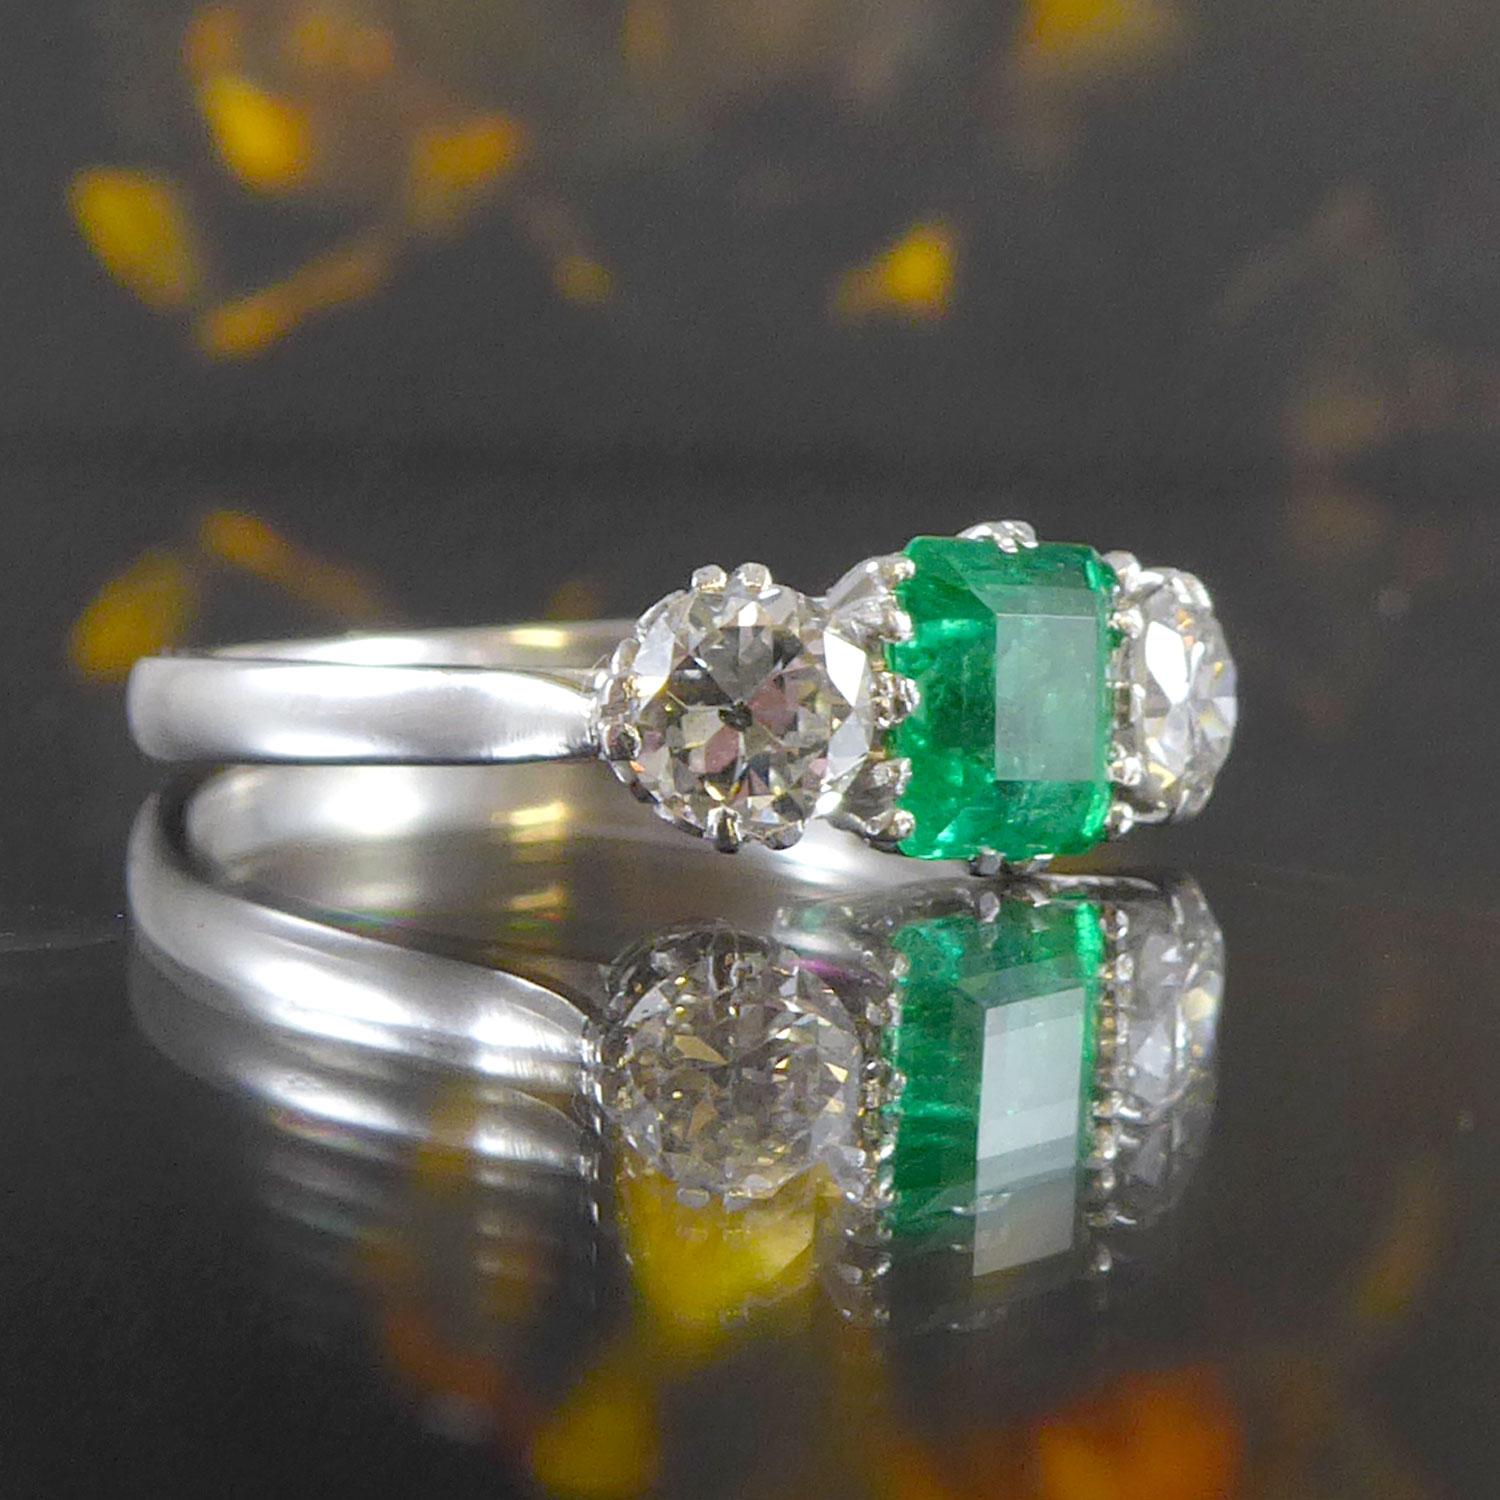 An emerald and diamond set three stone ring set with a rectangular shaped step cut emerald approx. 5.88mm x 4.66mm x 3.82mm deep and set within a double six claw basket style setting.  The emerald is flanked to each side by an early brilliant cut